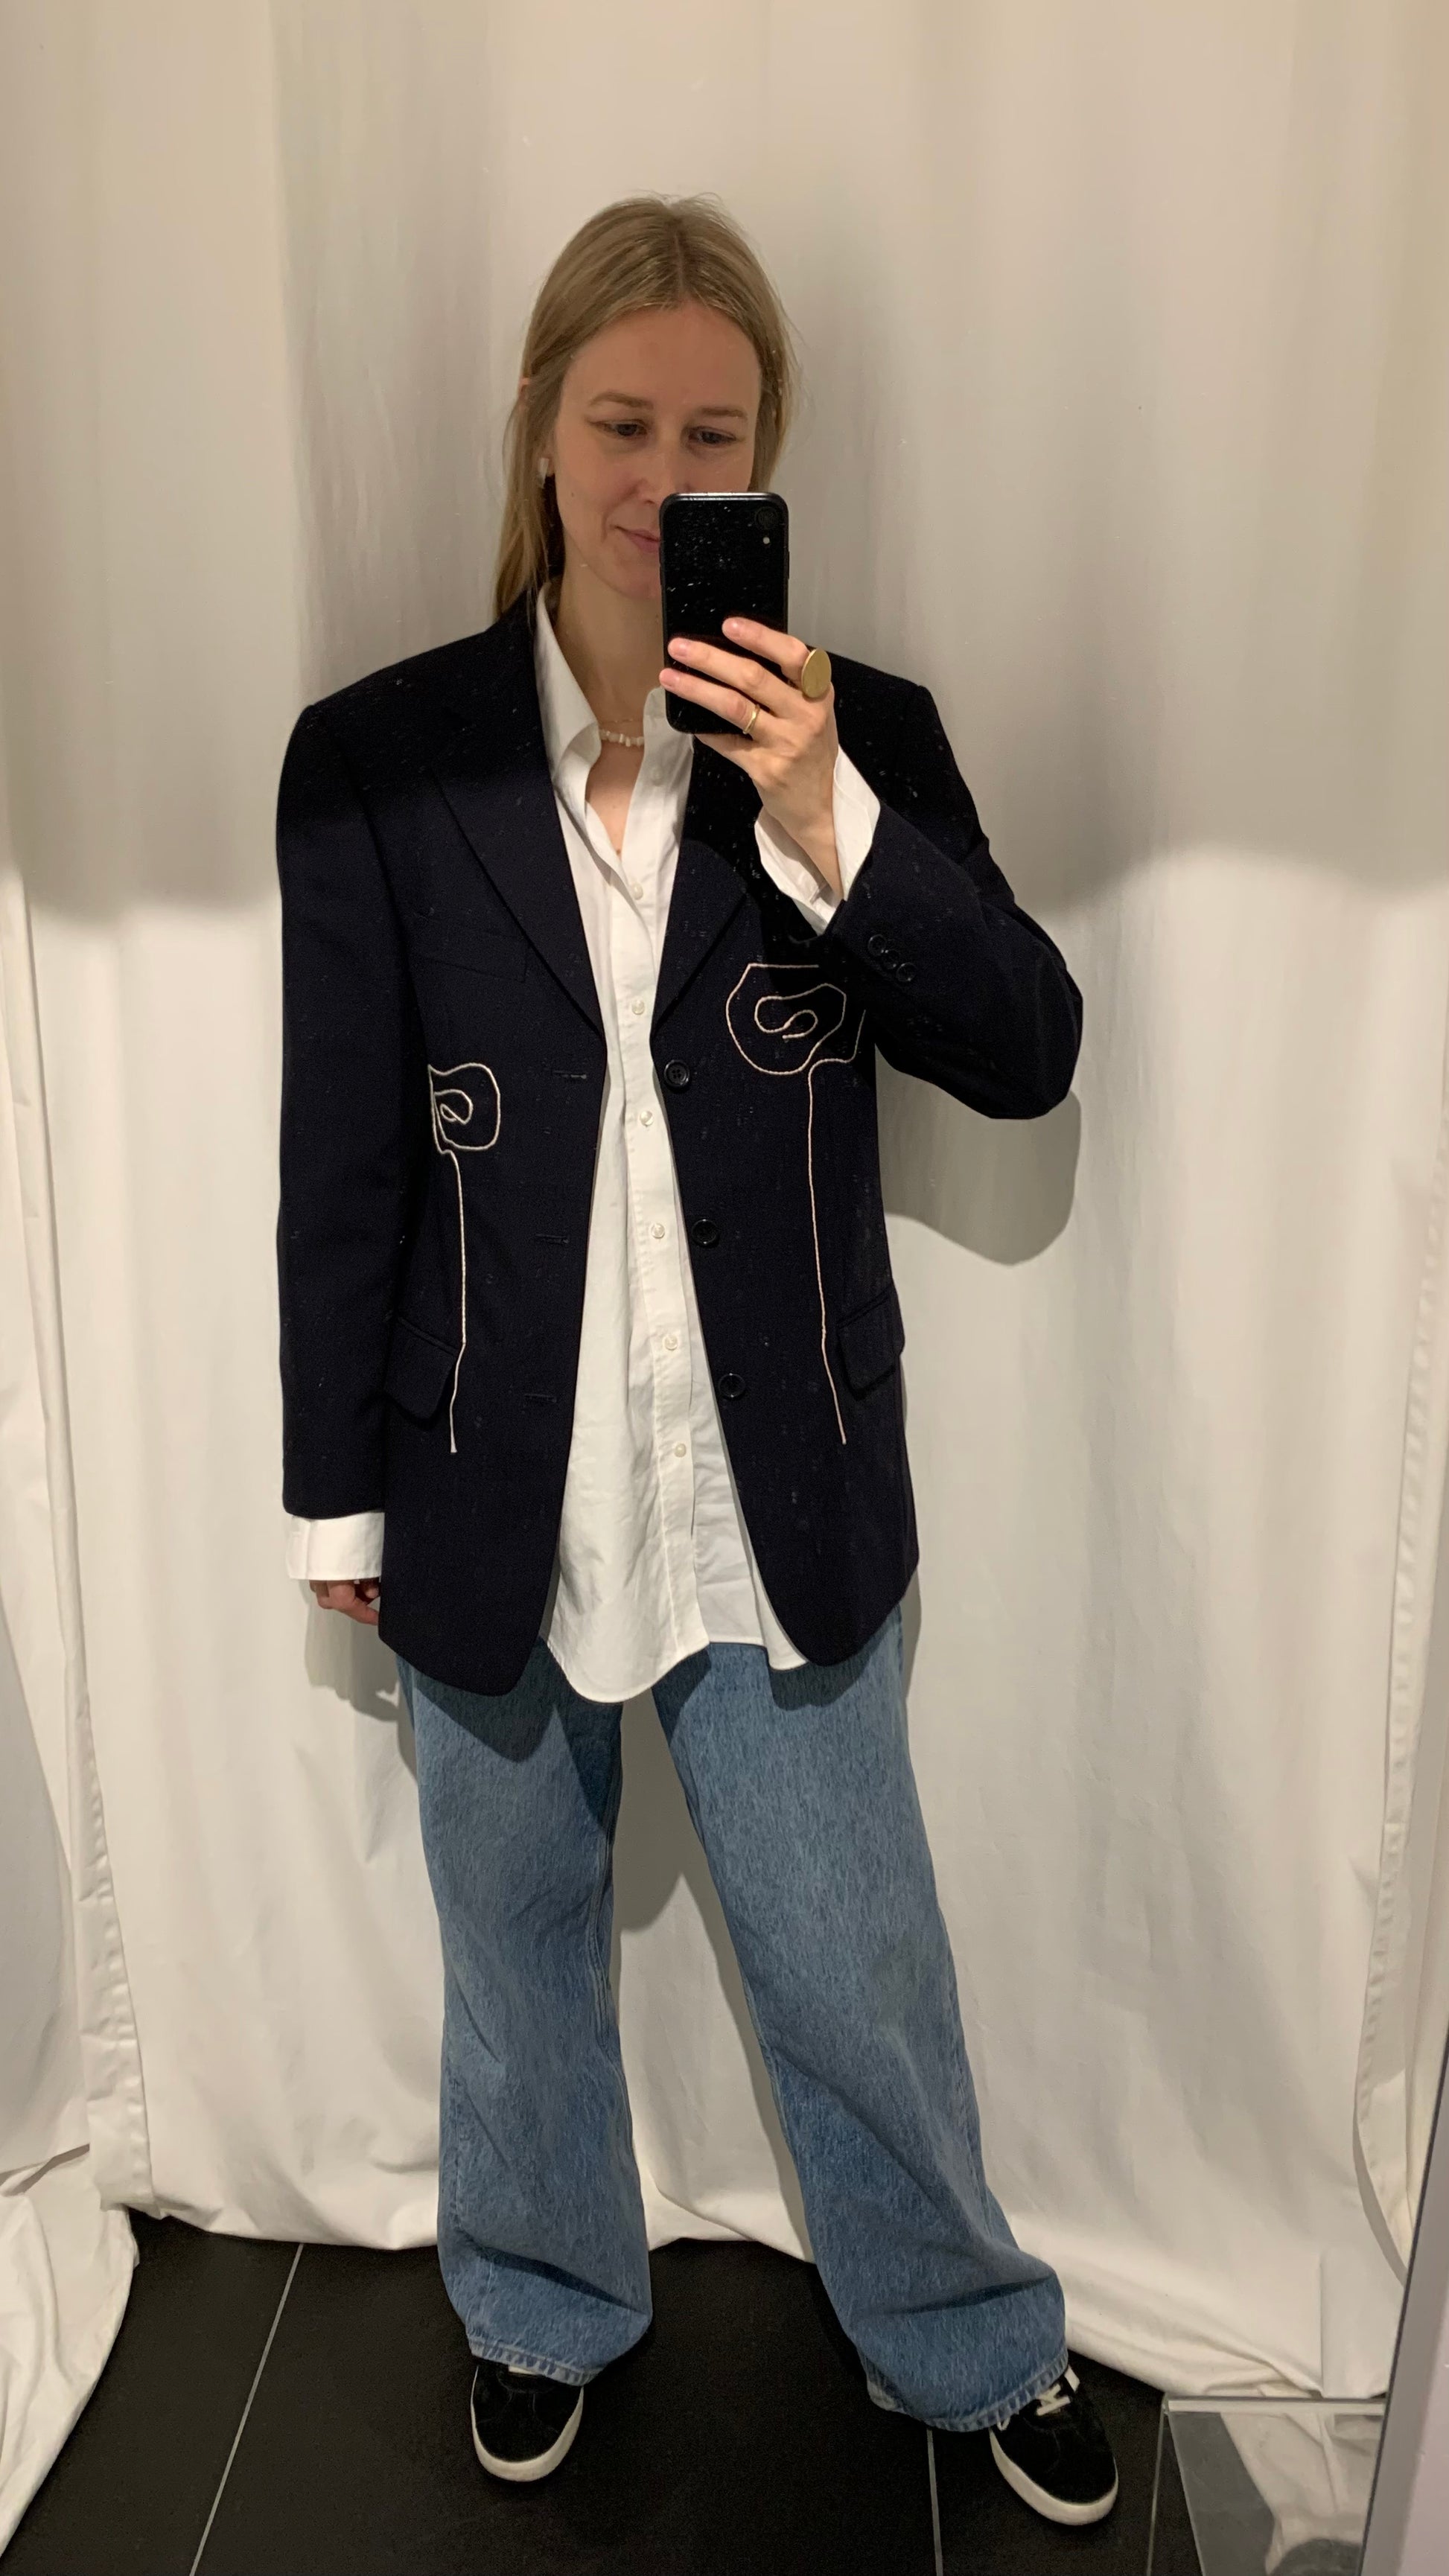 Blazer on person. Styled with denim trousers and a white shirt.